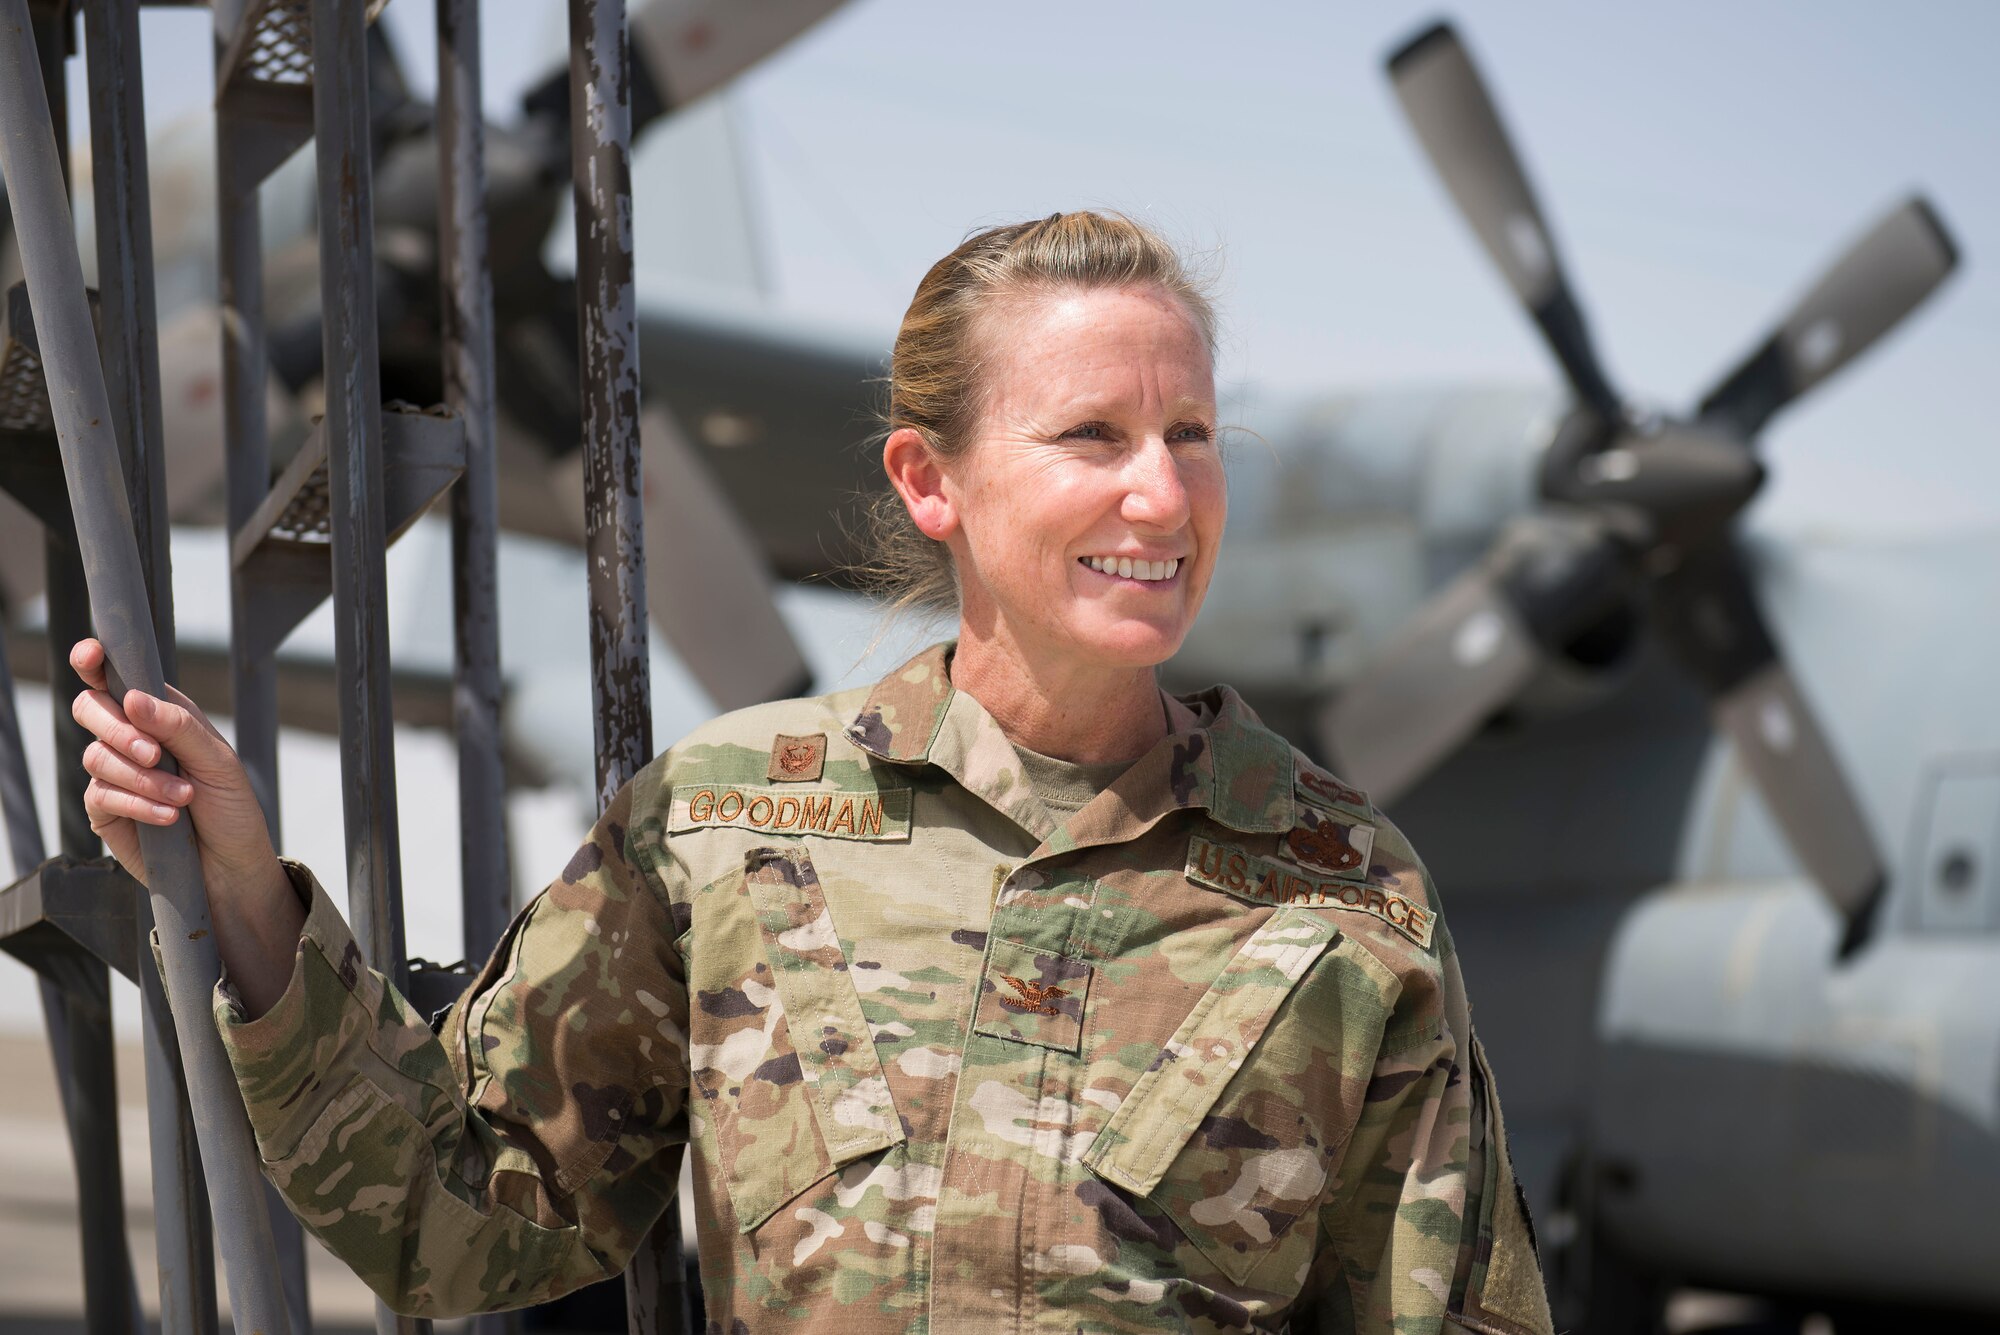 U.S. Air Force Col. Laura Goodman, 380th Expeditionary Operations Group commander stands on the flight line at Al Dhafra Air Base, United Arab Emirates, March 22, 2021. Goodman hails from Denver, Colorado, and graduated from the U.S. Air Force Academy in 1997. (U.S. Air Force photo by Staff Sgt. Zade Vadnais)